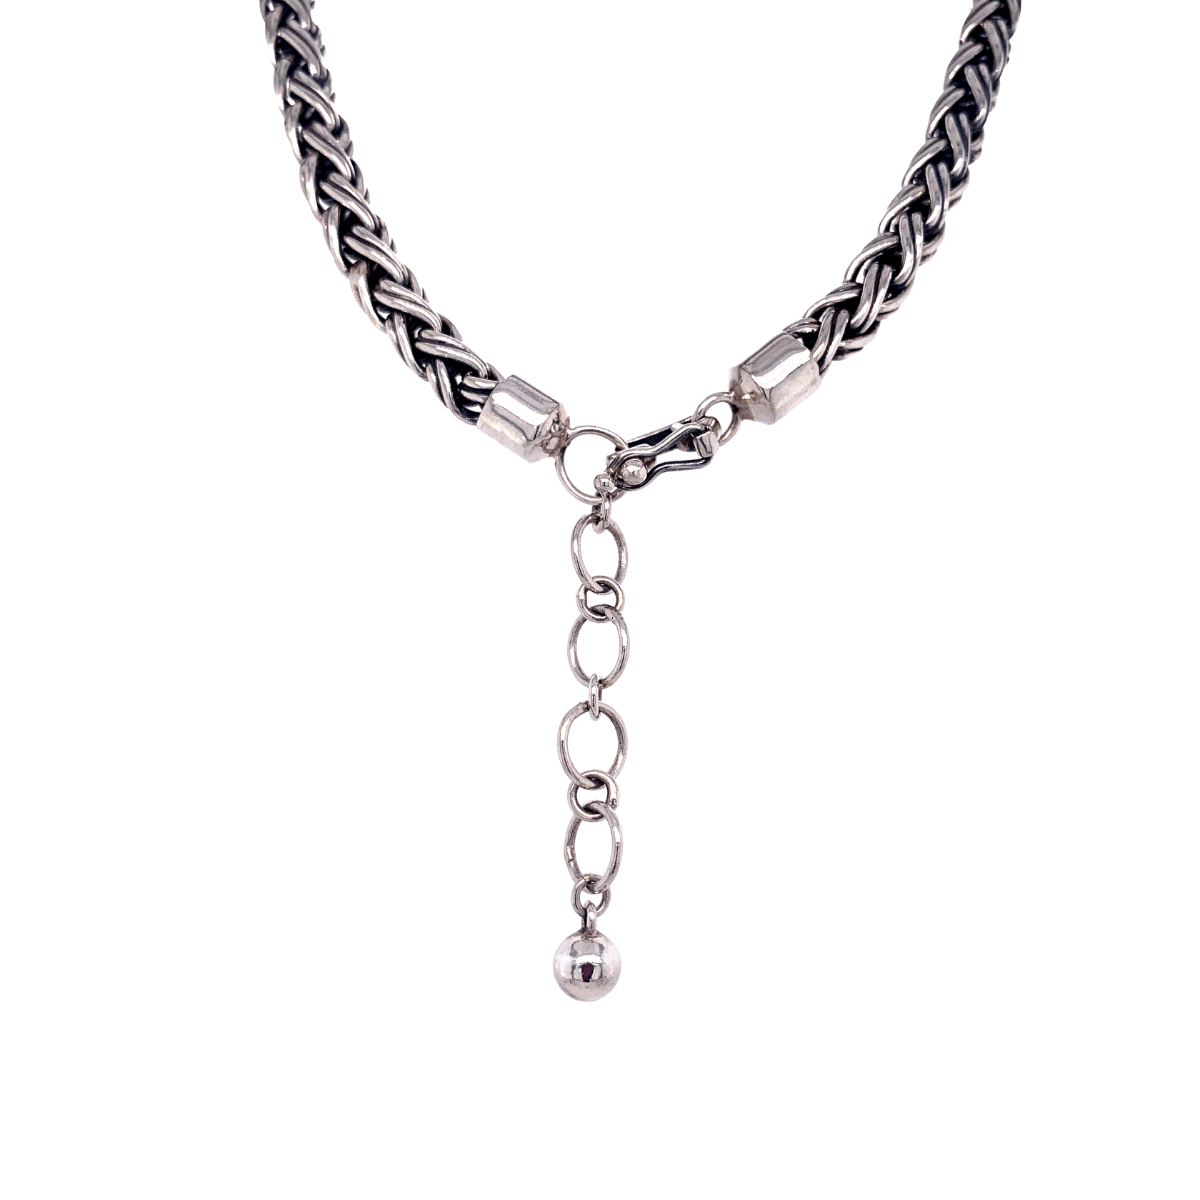 Double Braided Large Sterling Silver Necklace - Qinti - The Peruvian Shop